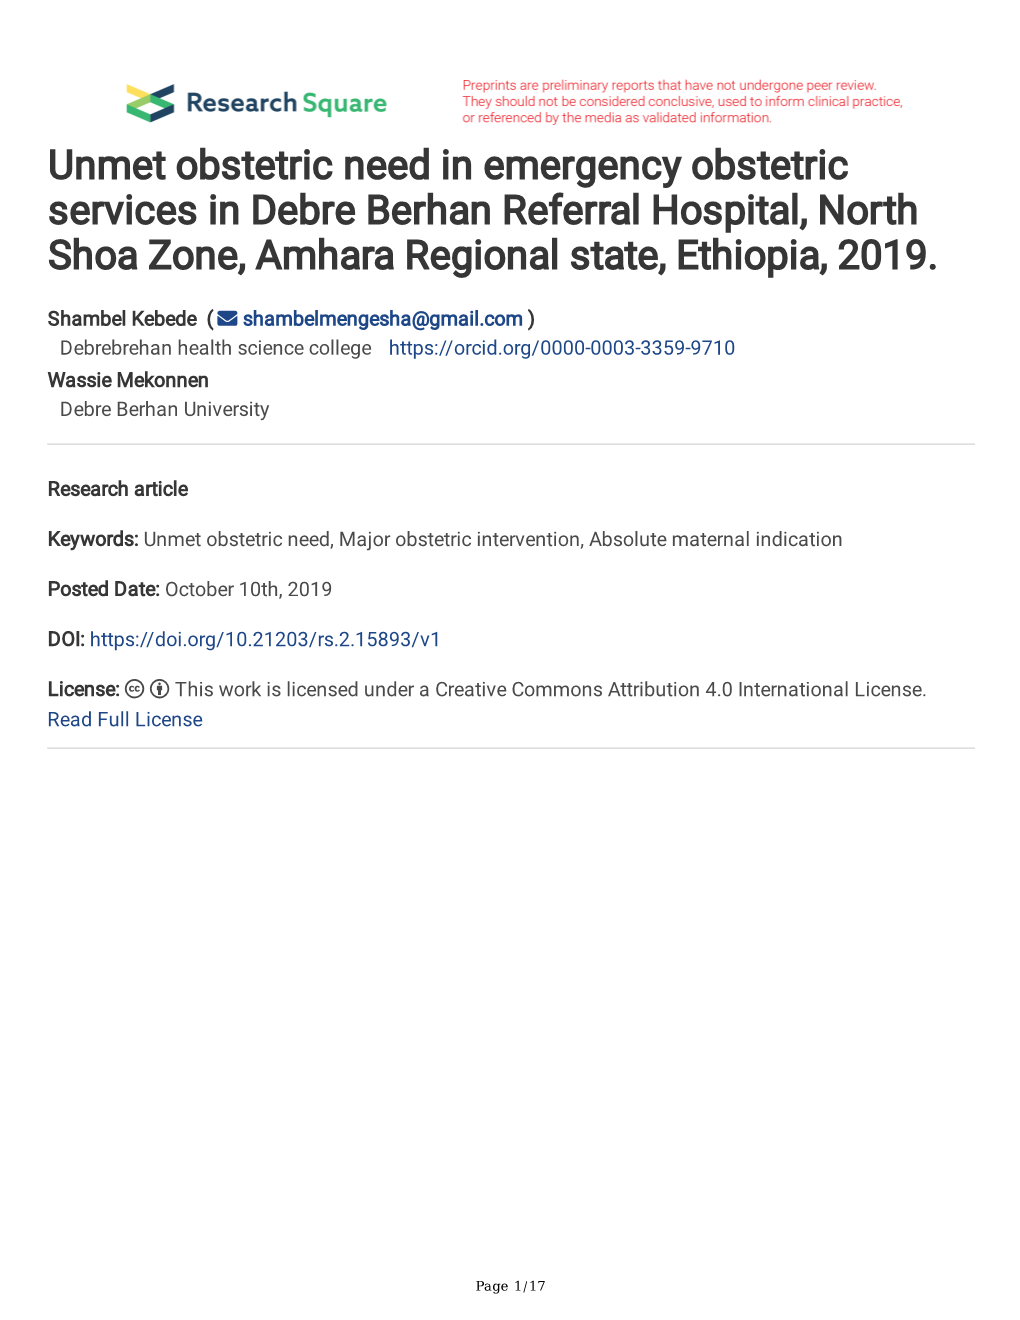 Unmet Obstetric Need in Emergency Obstetric Services in Debre Berhan Referral Hospital, North Shoa Zone, Amhara Regional State, Ethiopia, 2019